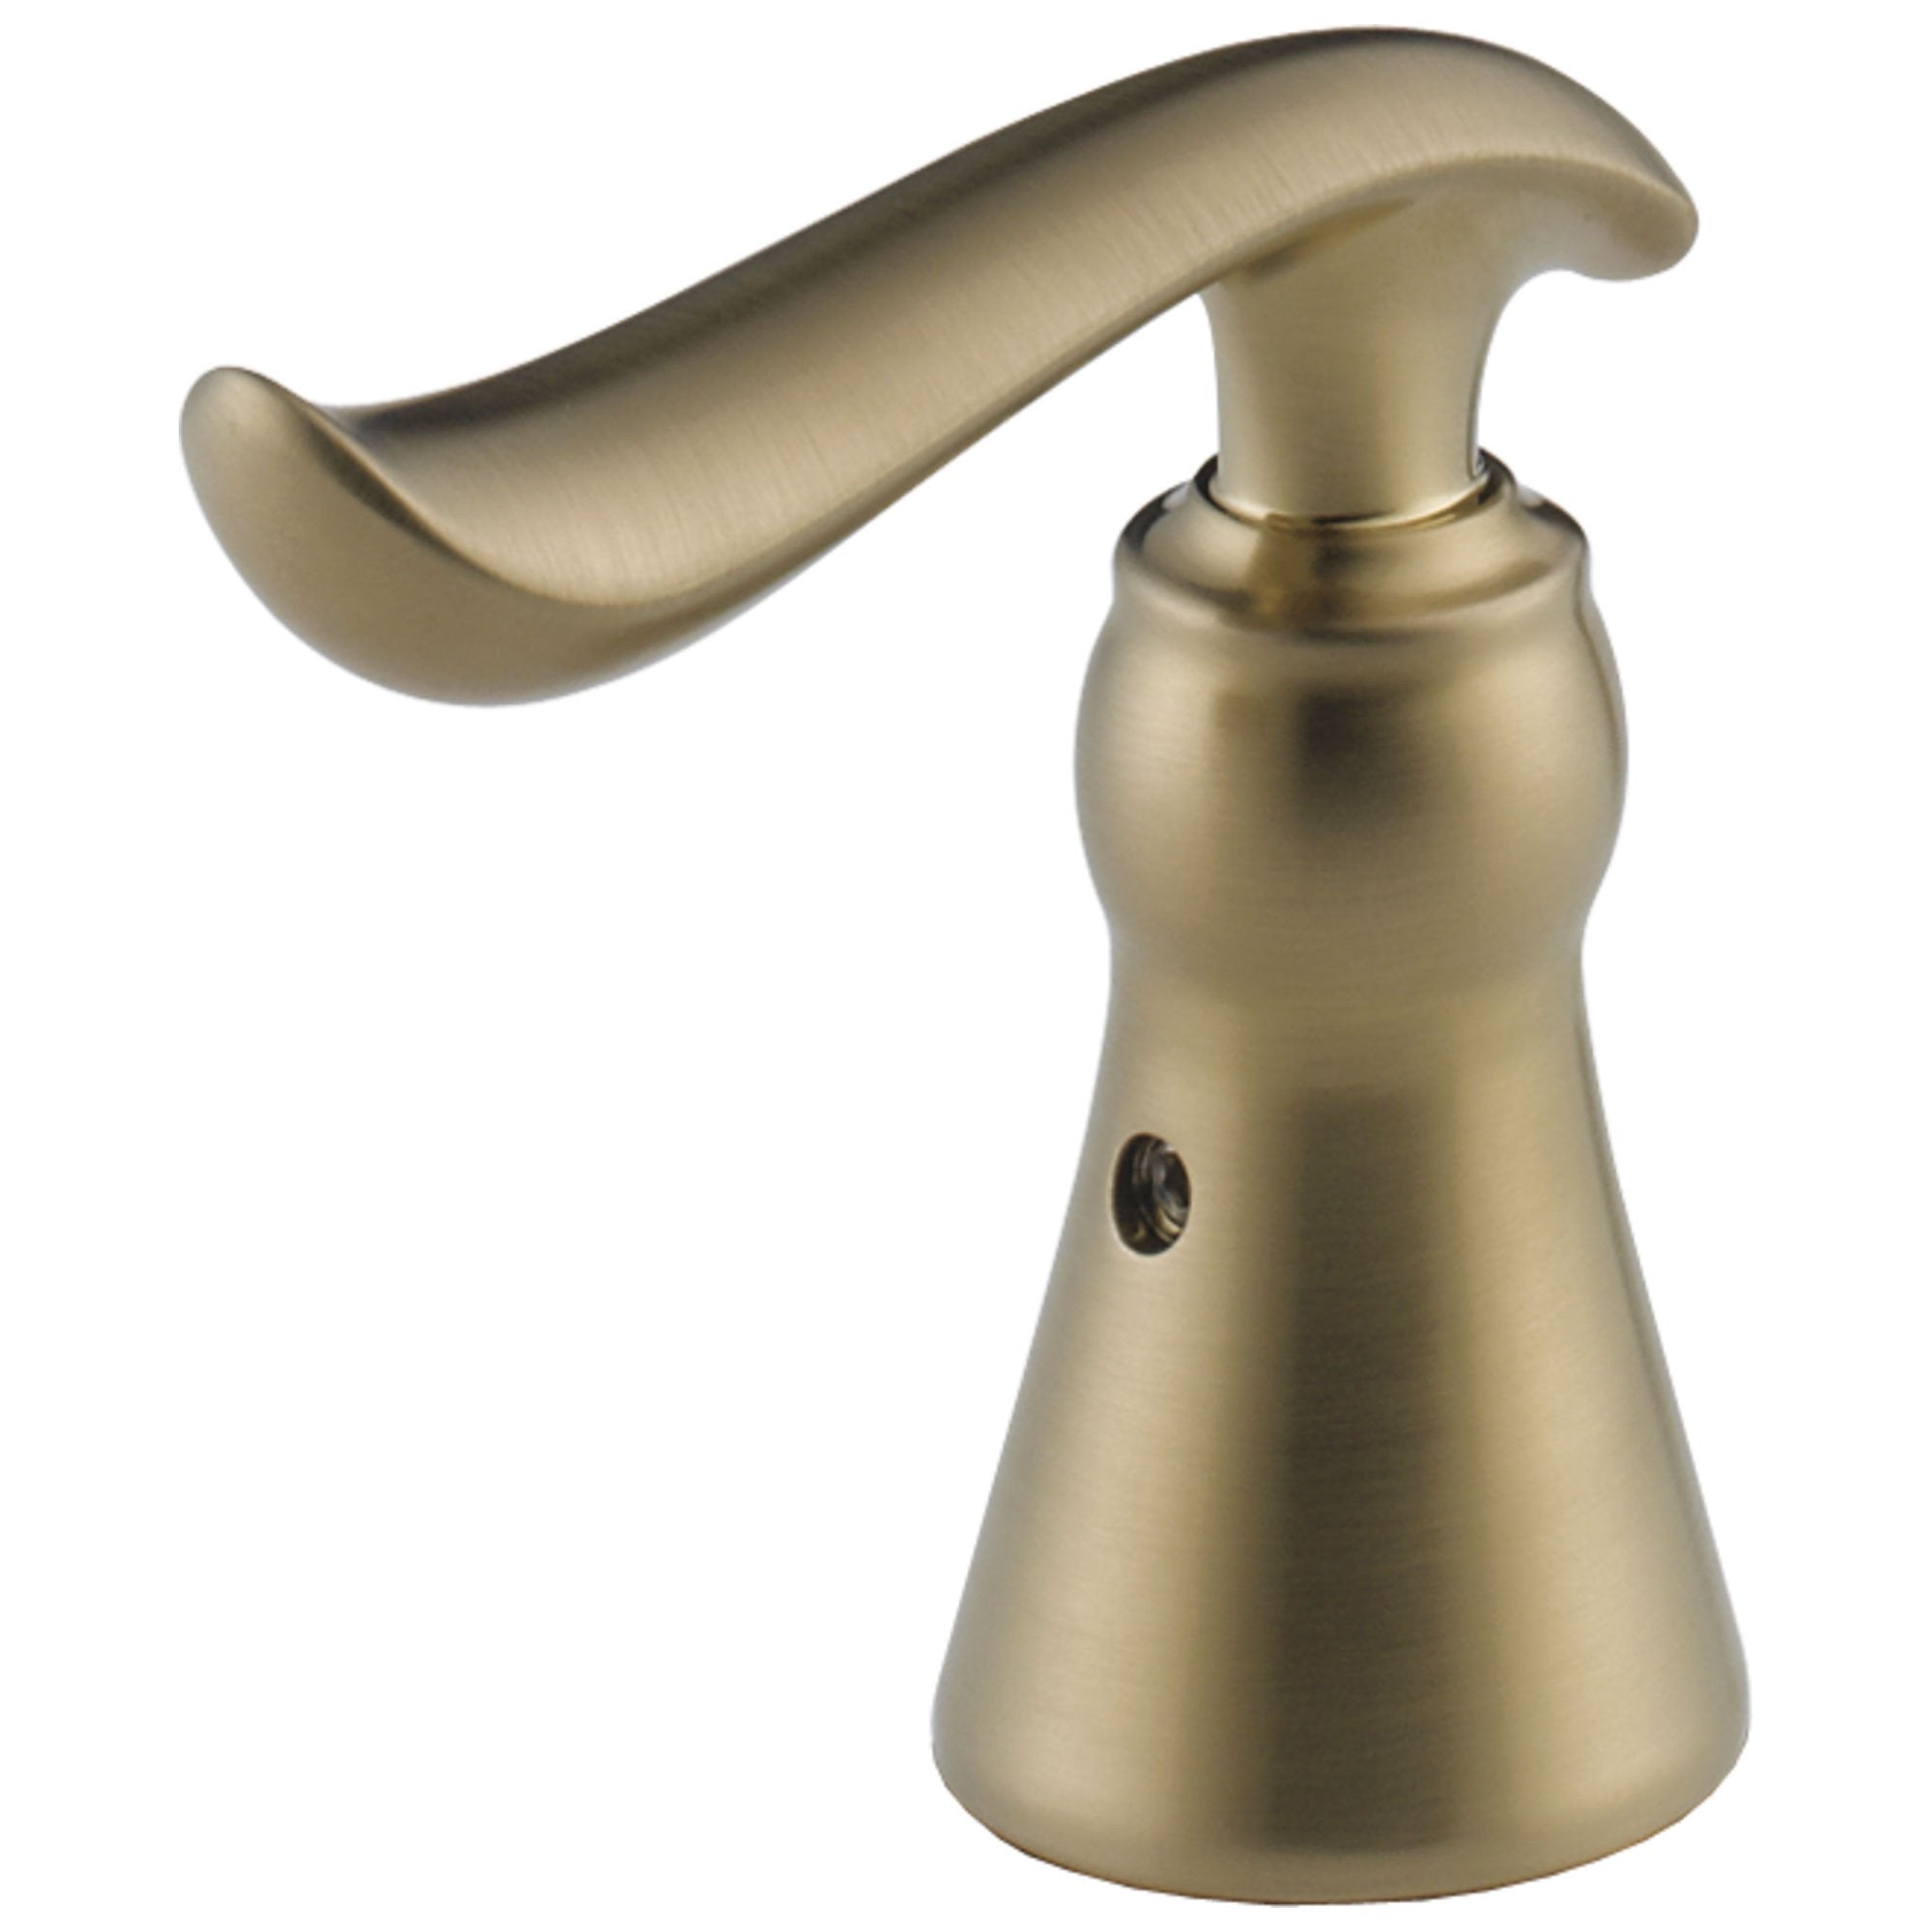 Delta Linden Collection Champagne Bronze Finish Lavatory Lever Handles - Quantity 2 Included 555675